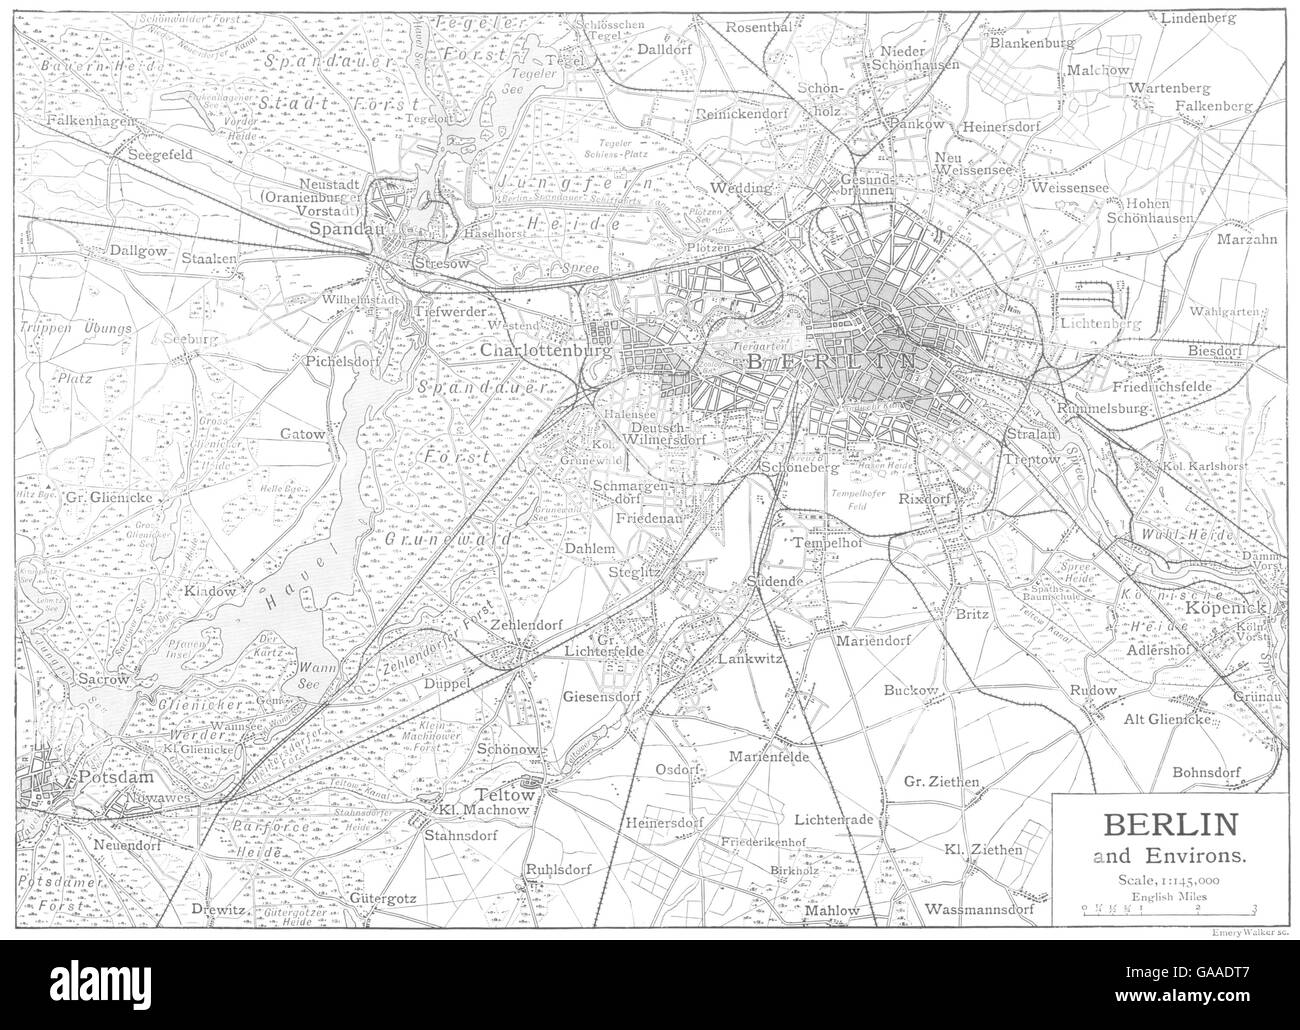 GERMANY: Berlin and Environs, 1910 antique map Stock Photo